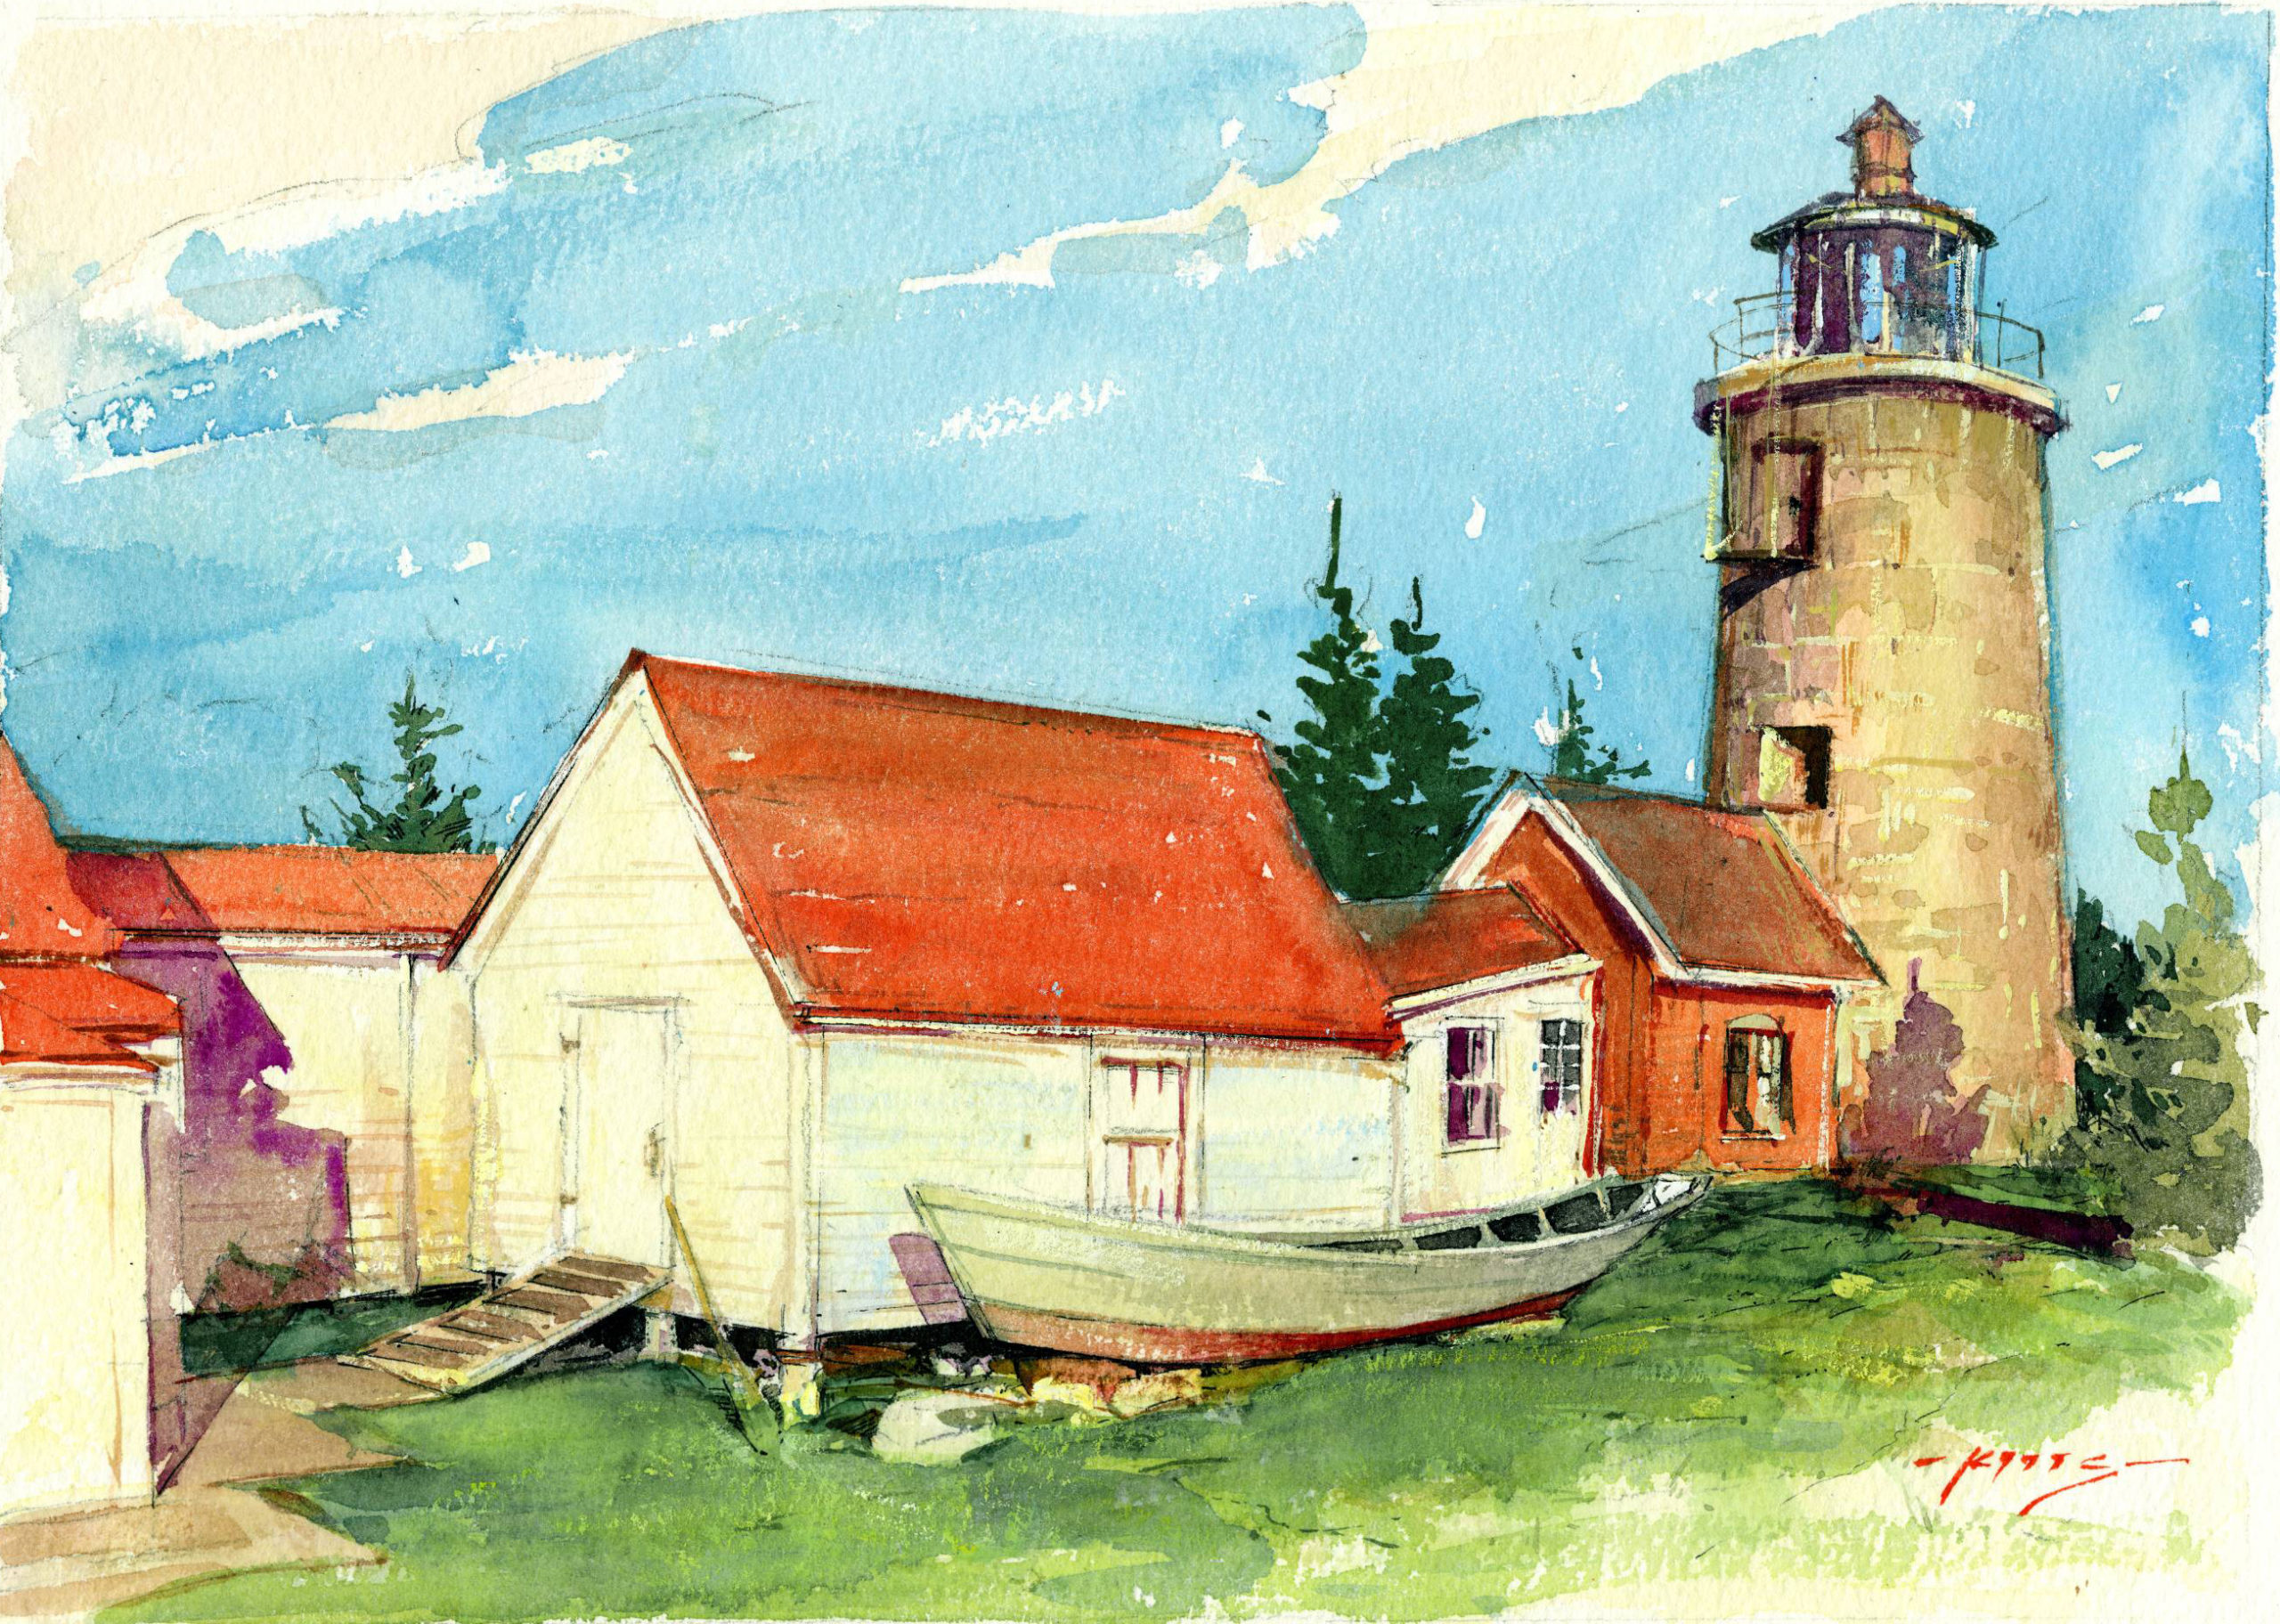 Thomas Jefferson Kitts, "Lighthouse," watercolor and ink